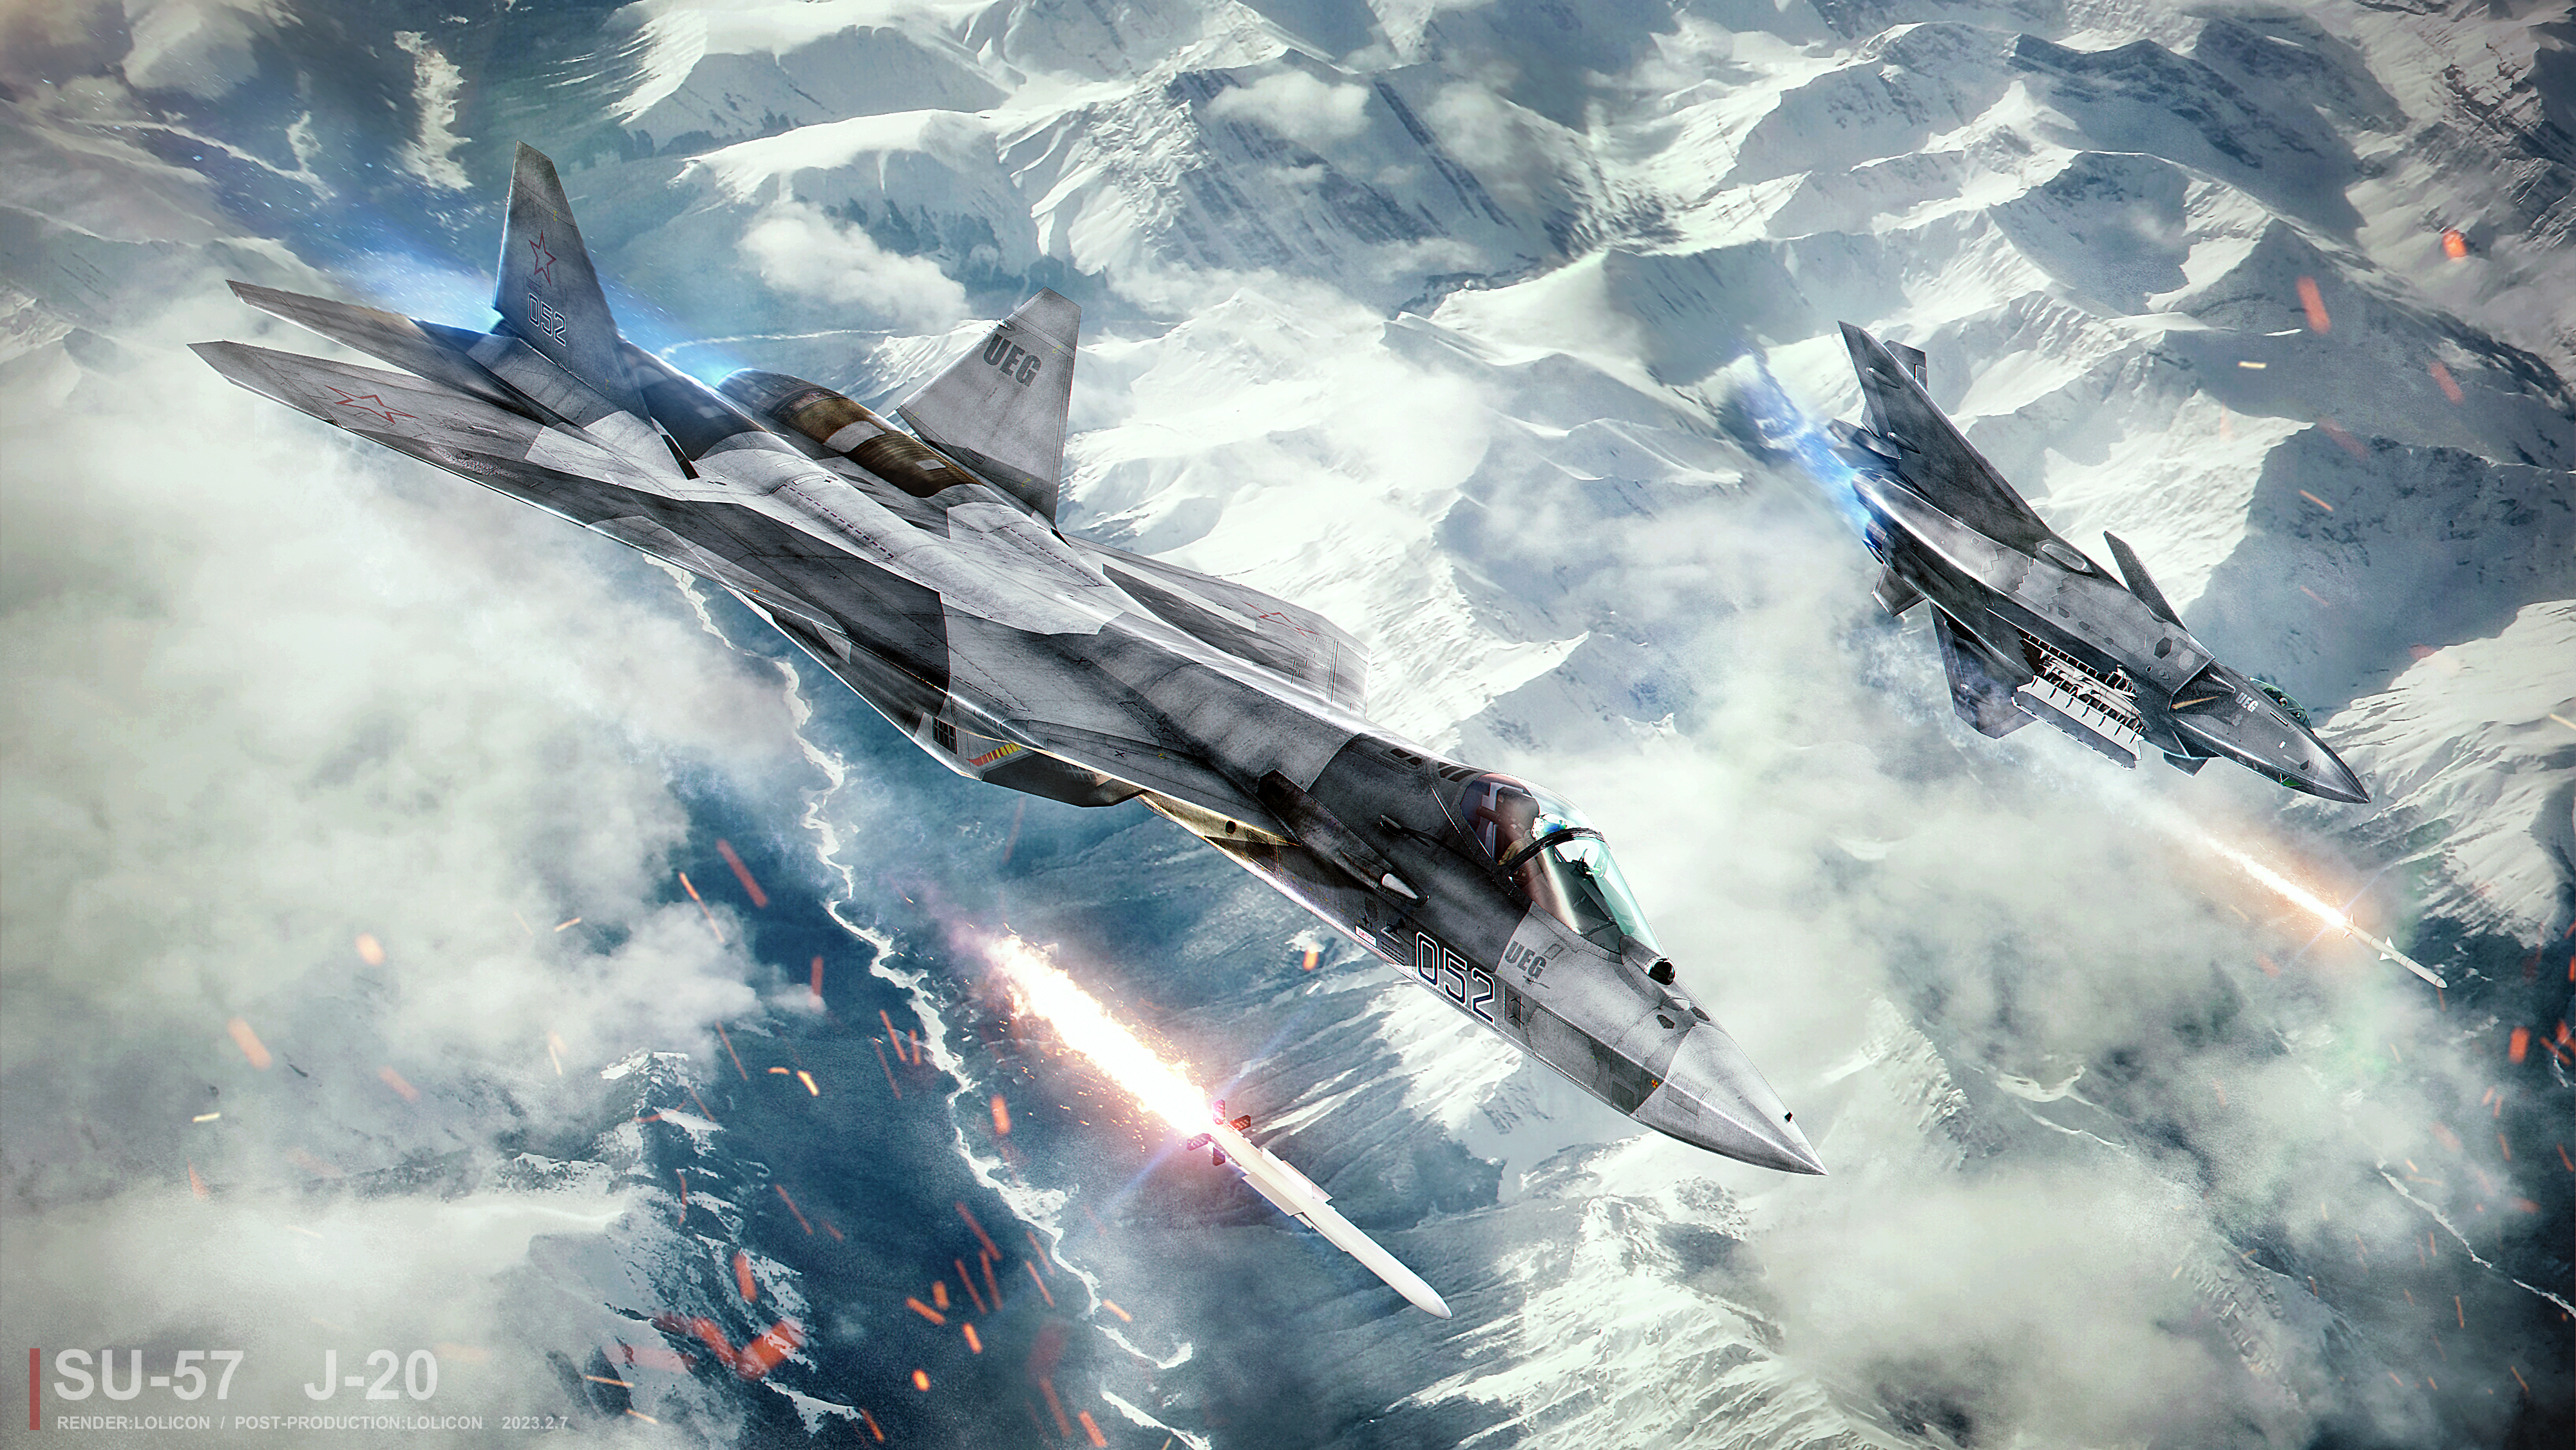 General 4000x2252 Russian Air Force Russian/Soviet aircraft CGI artwork mountains White Mountains jet fighter Sukhoi Chengdu J-20 Chinese aircraft UEG Sukhoi Su-57 military watermarked flying sky dated pilot helmet missiles